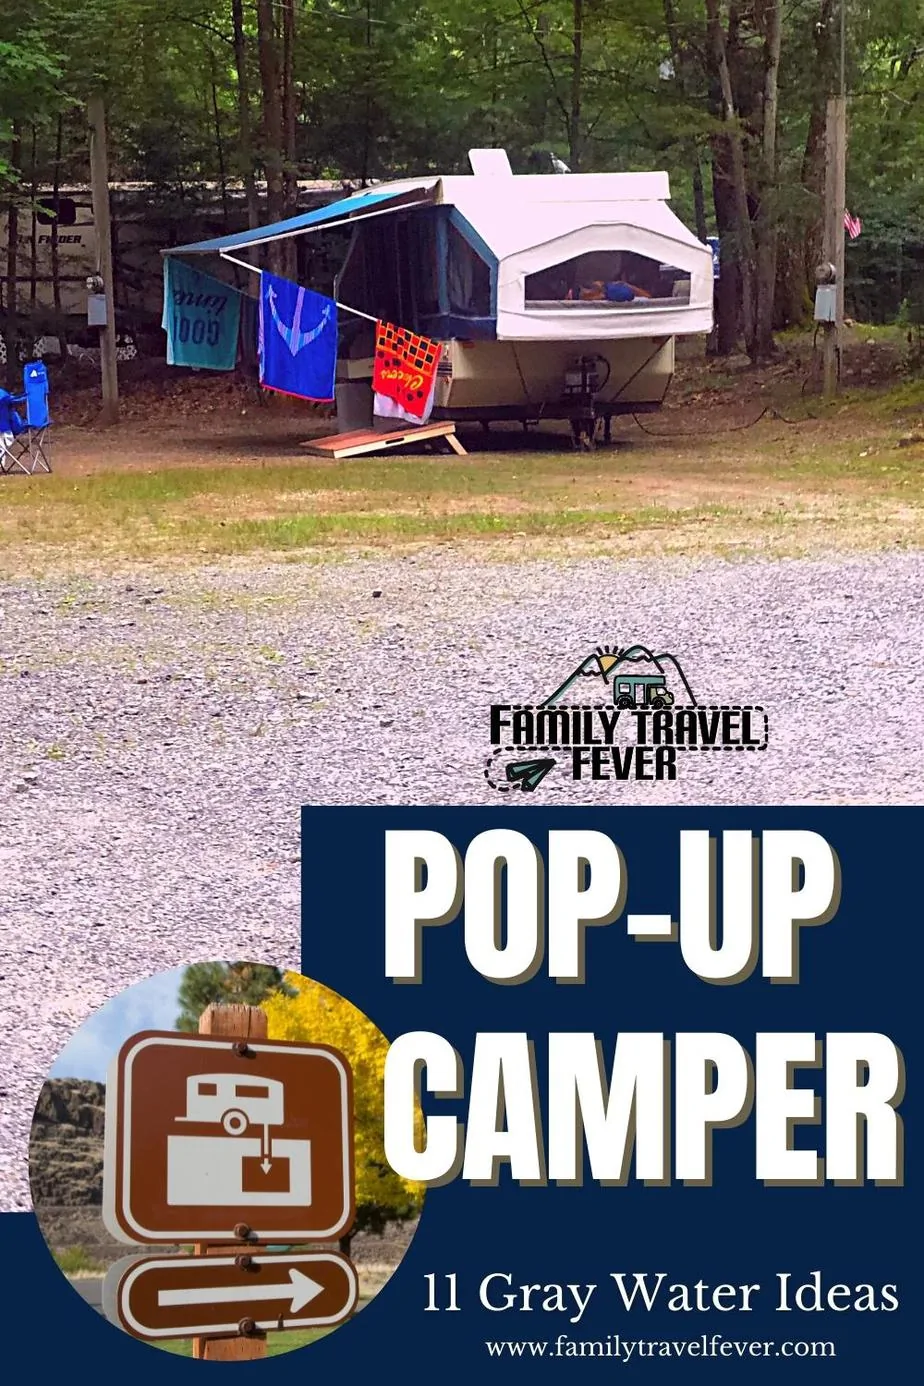 A pinterest take of a pop up camper with family travel fever logo and bold pop up camper heading